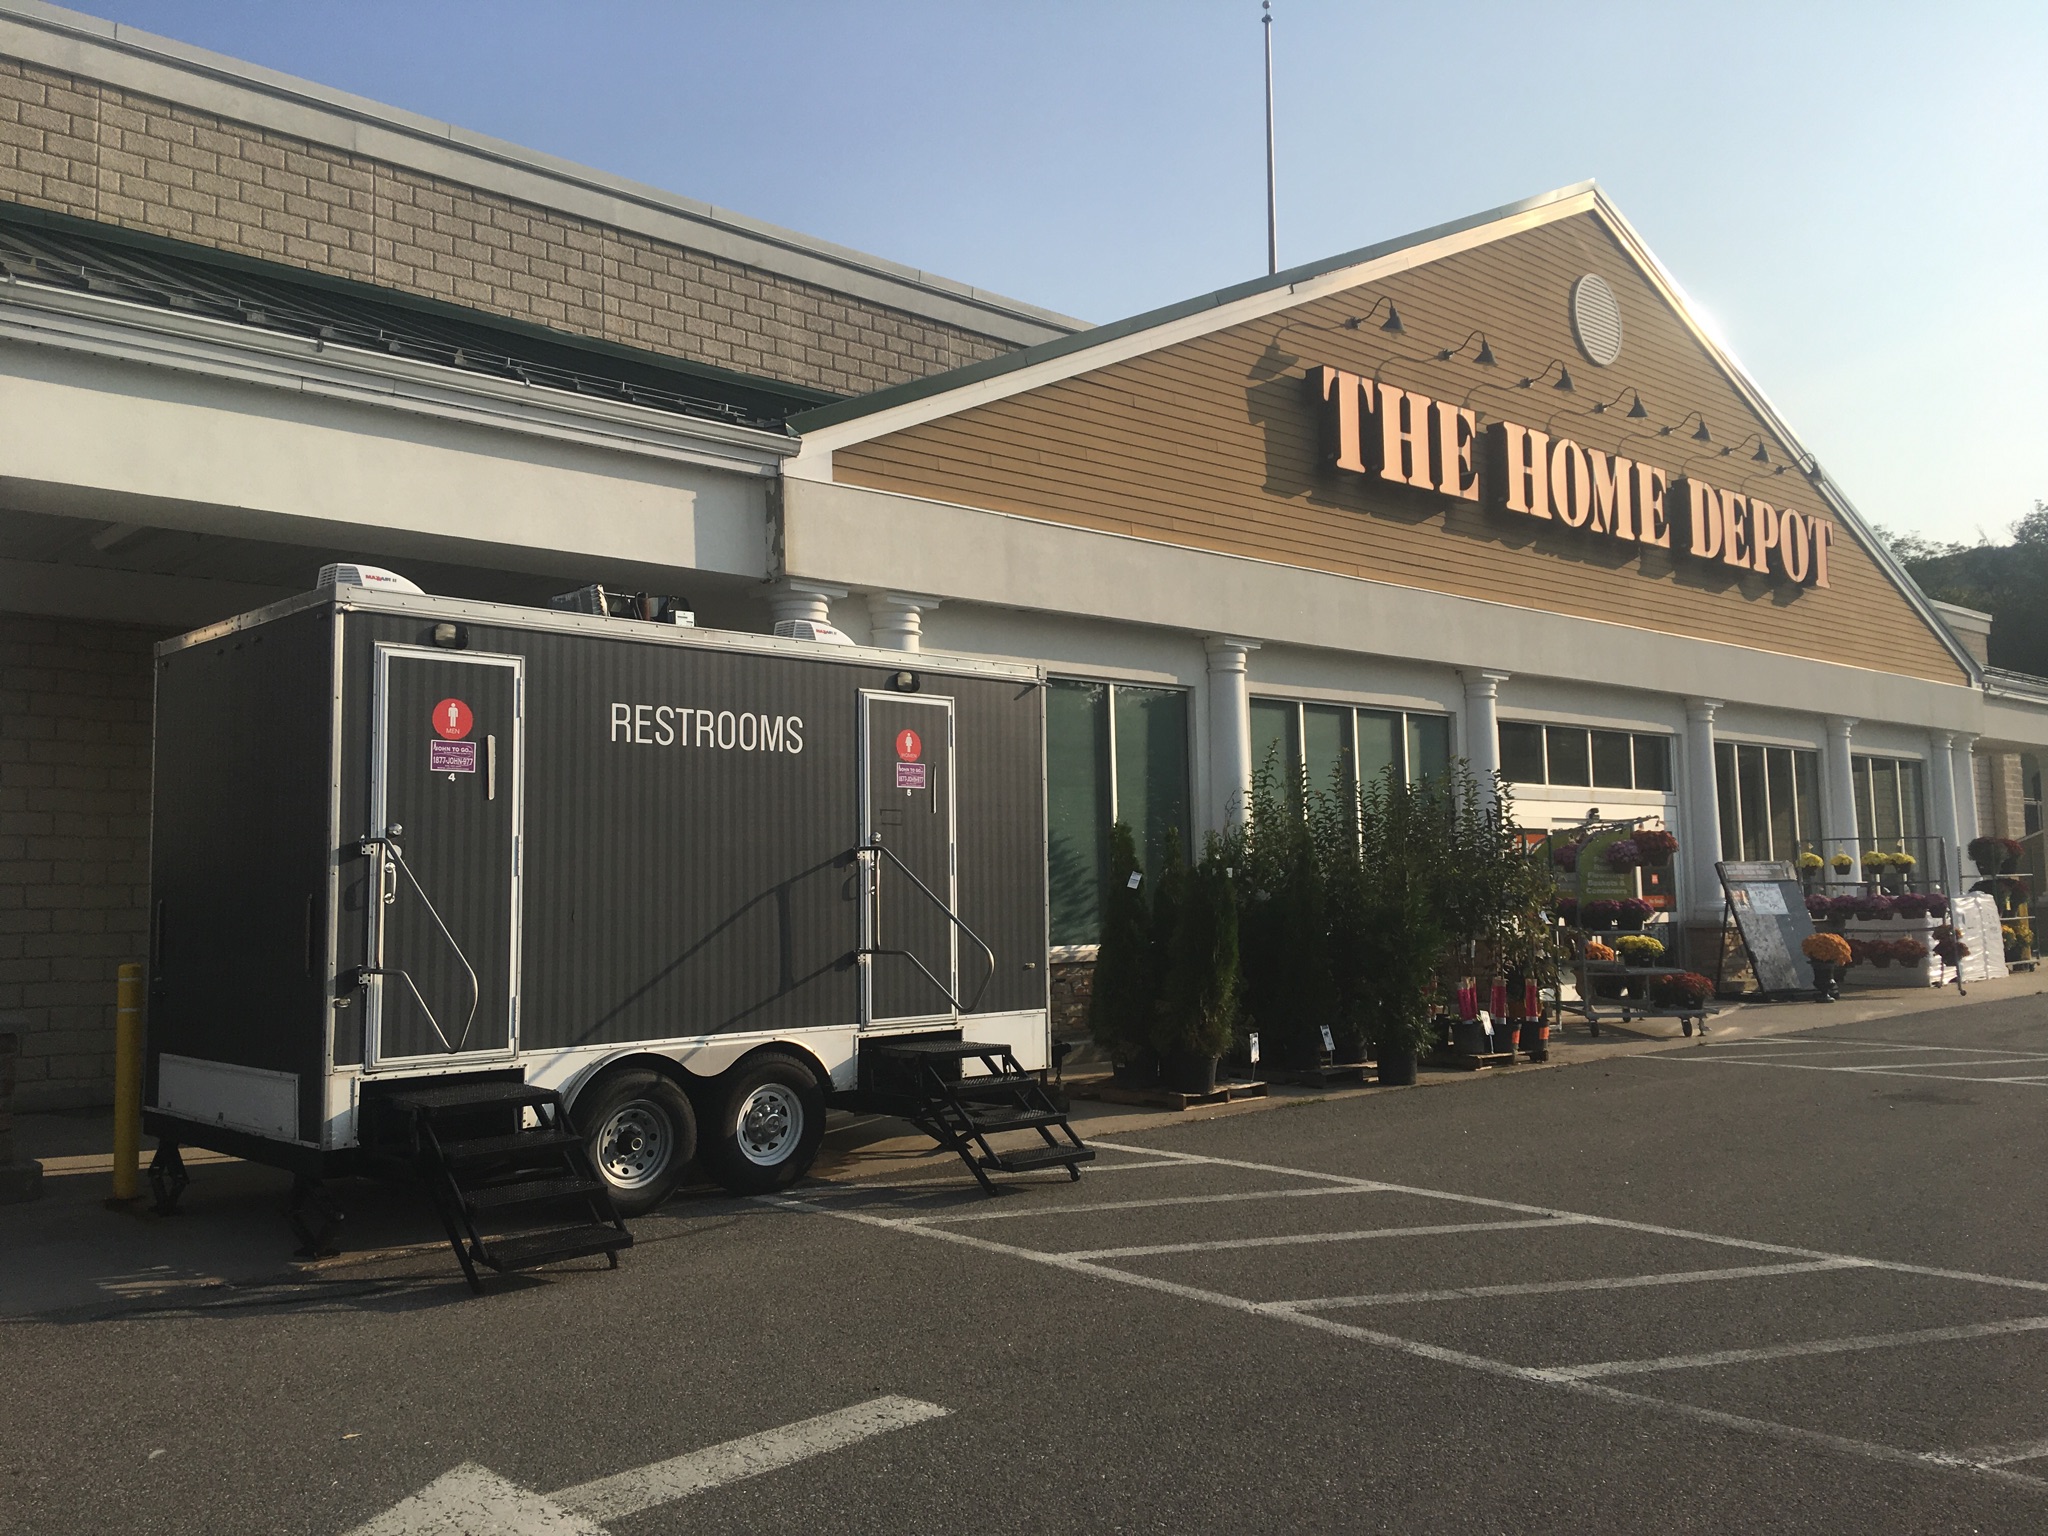 Five Station Stylish Restroom Trailer, at a Home Depot Remodal, in Elmont NY